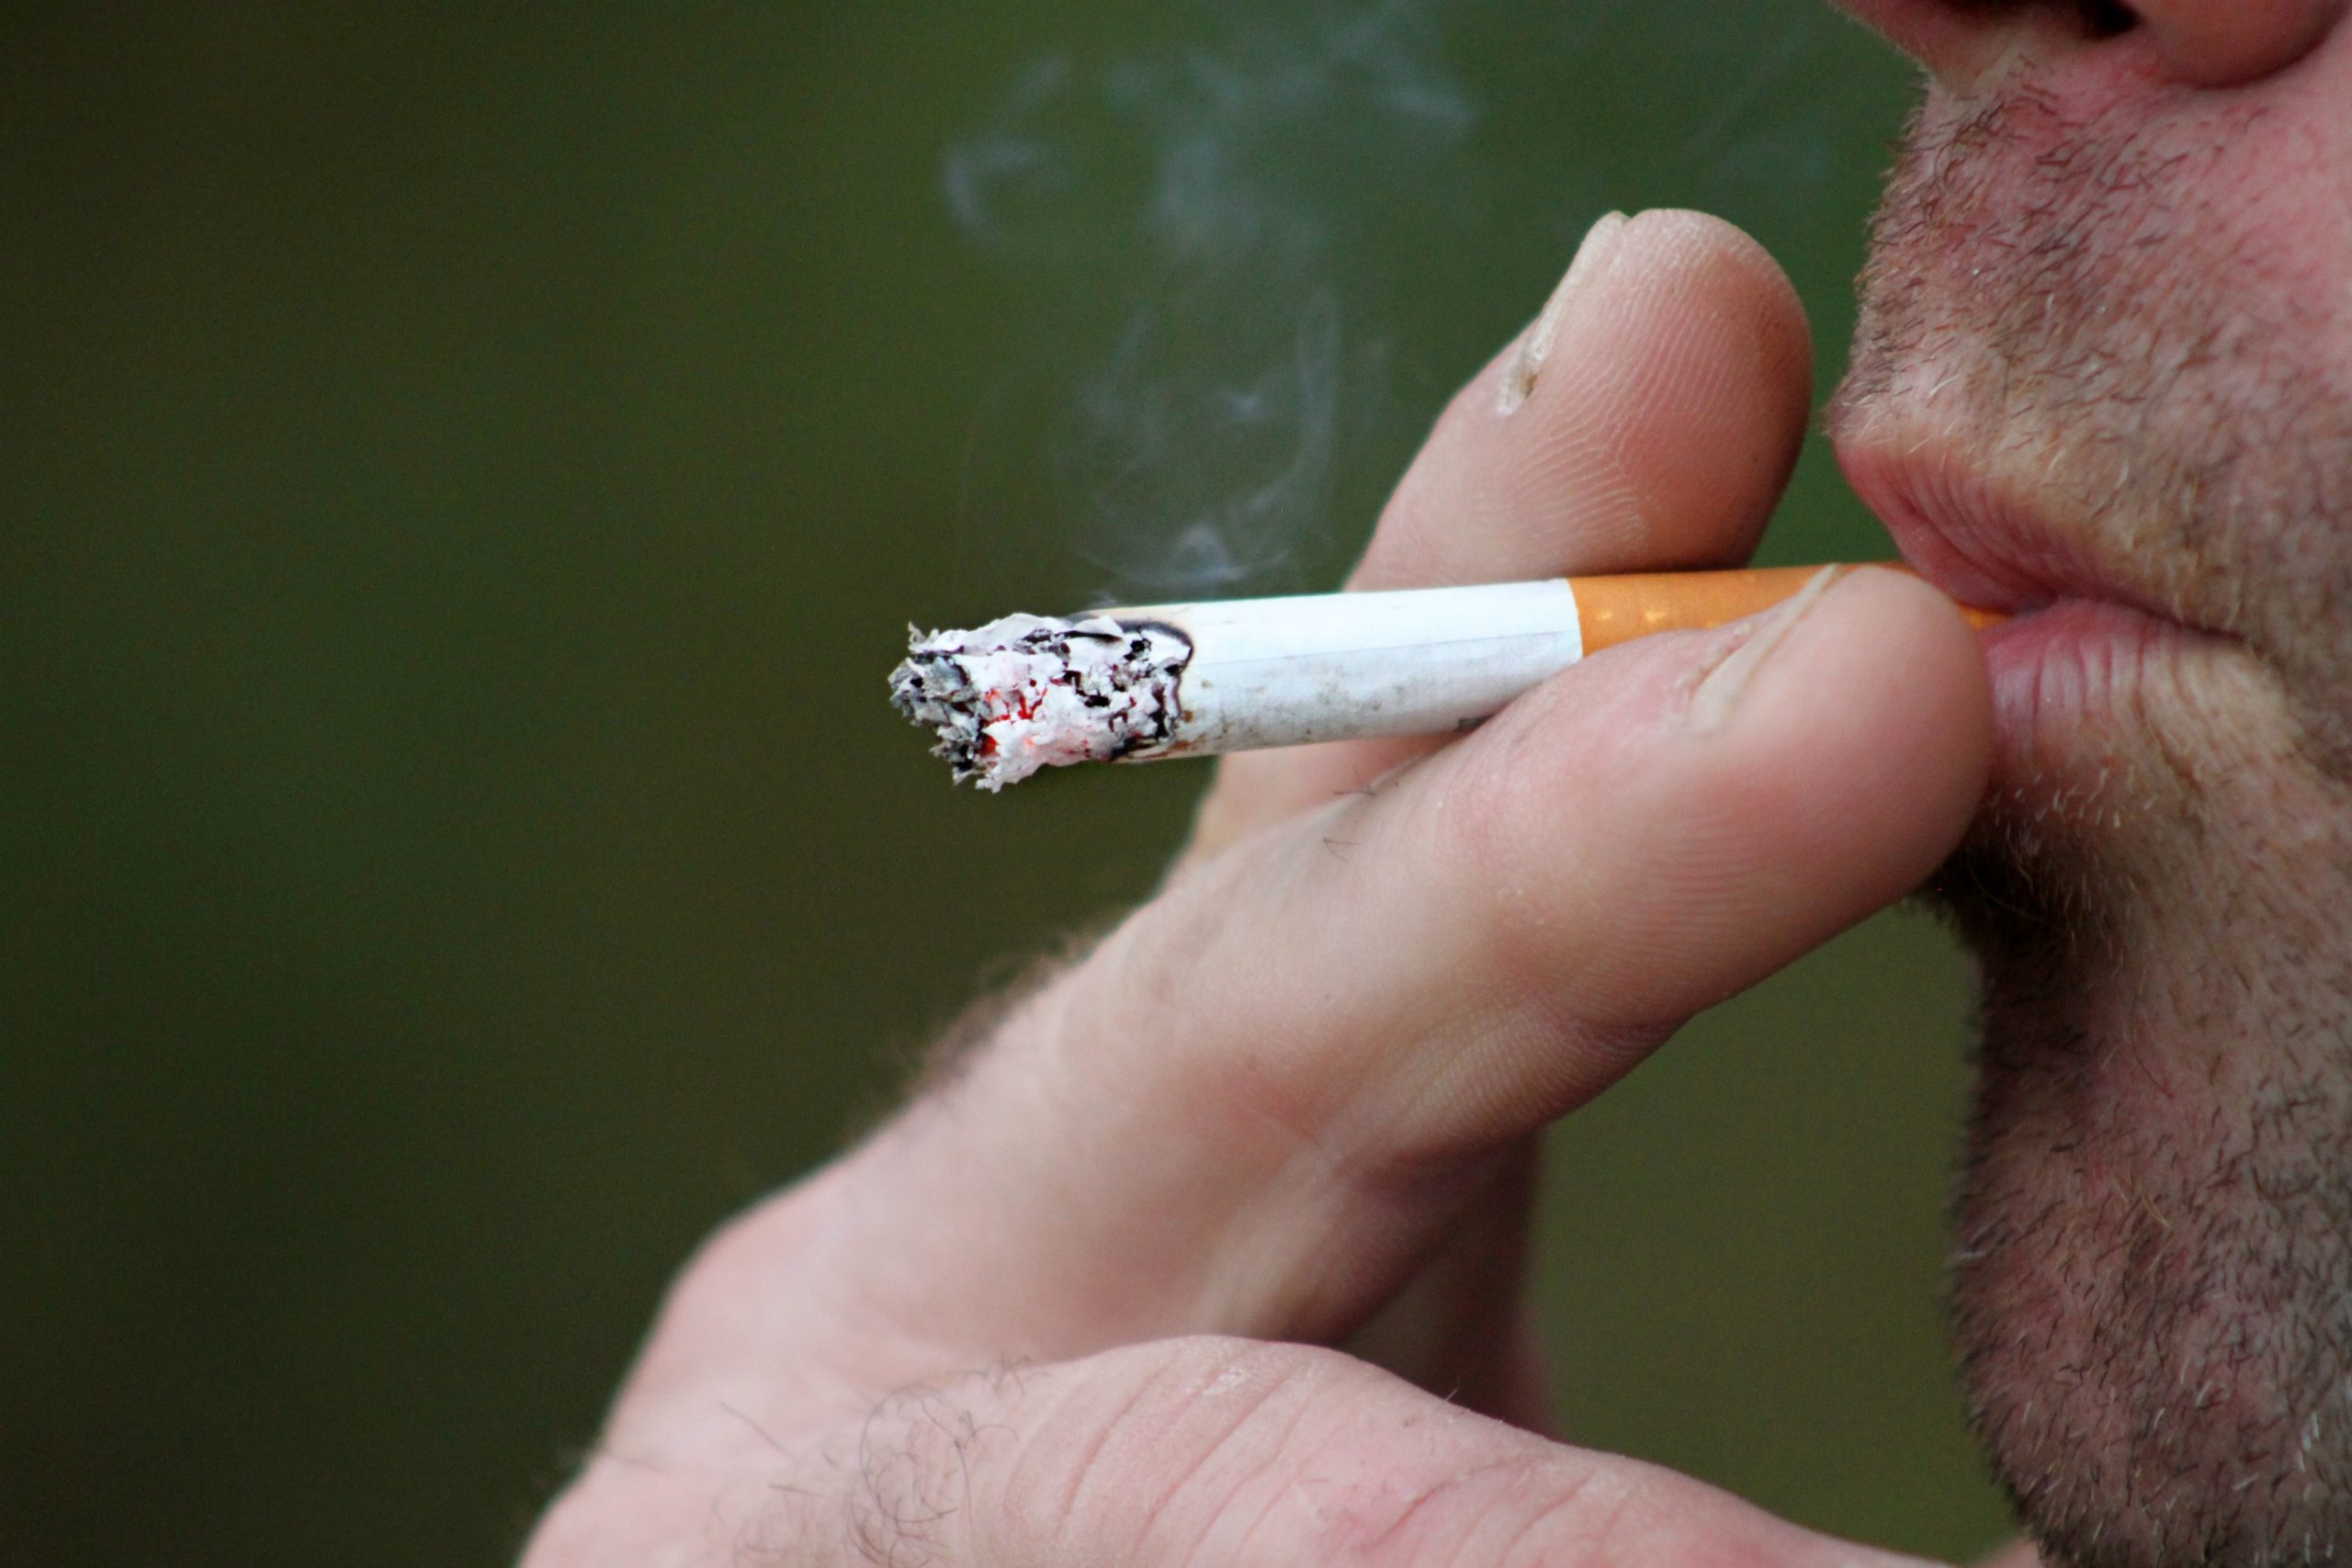 Shock figures over consequences of smoking in Spain's Balearic Islands